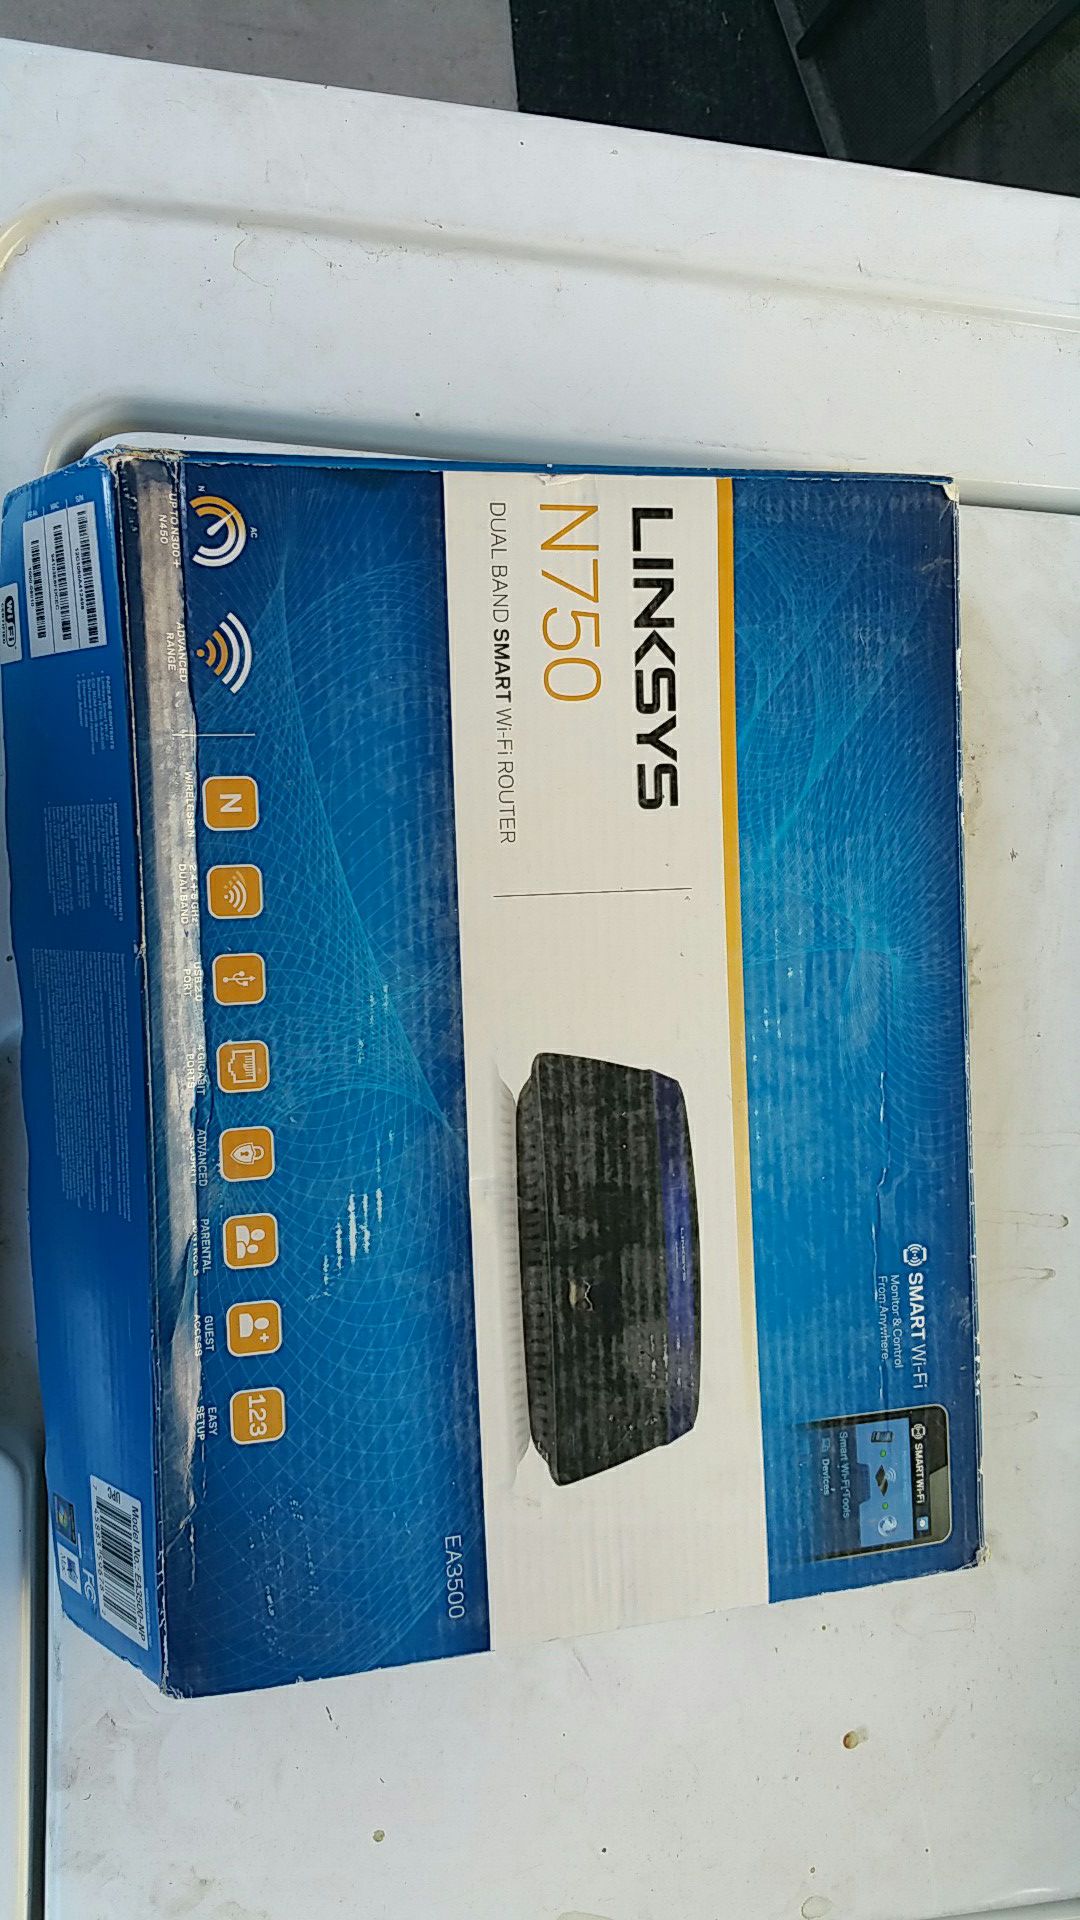 Links n750 dual band smart WiFi router